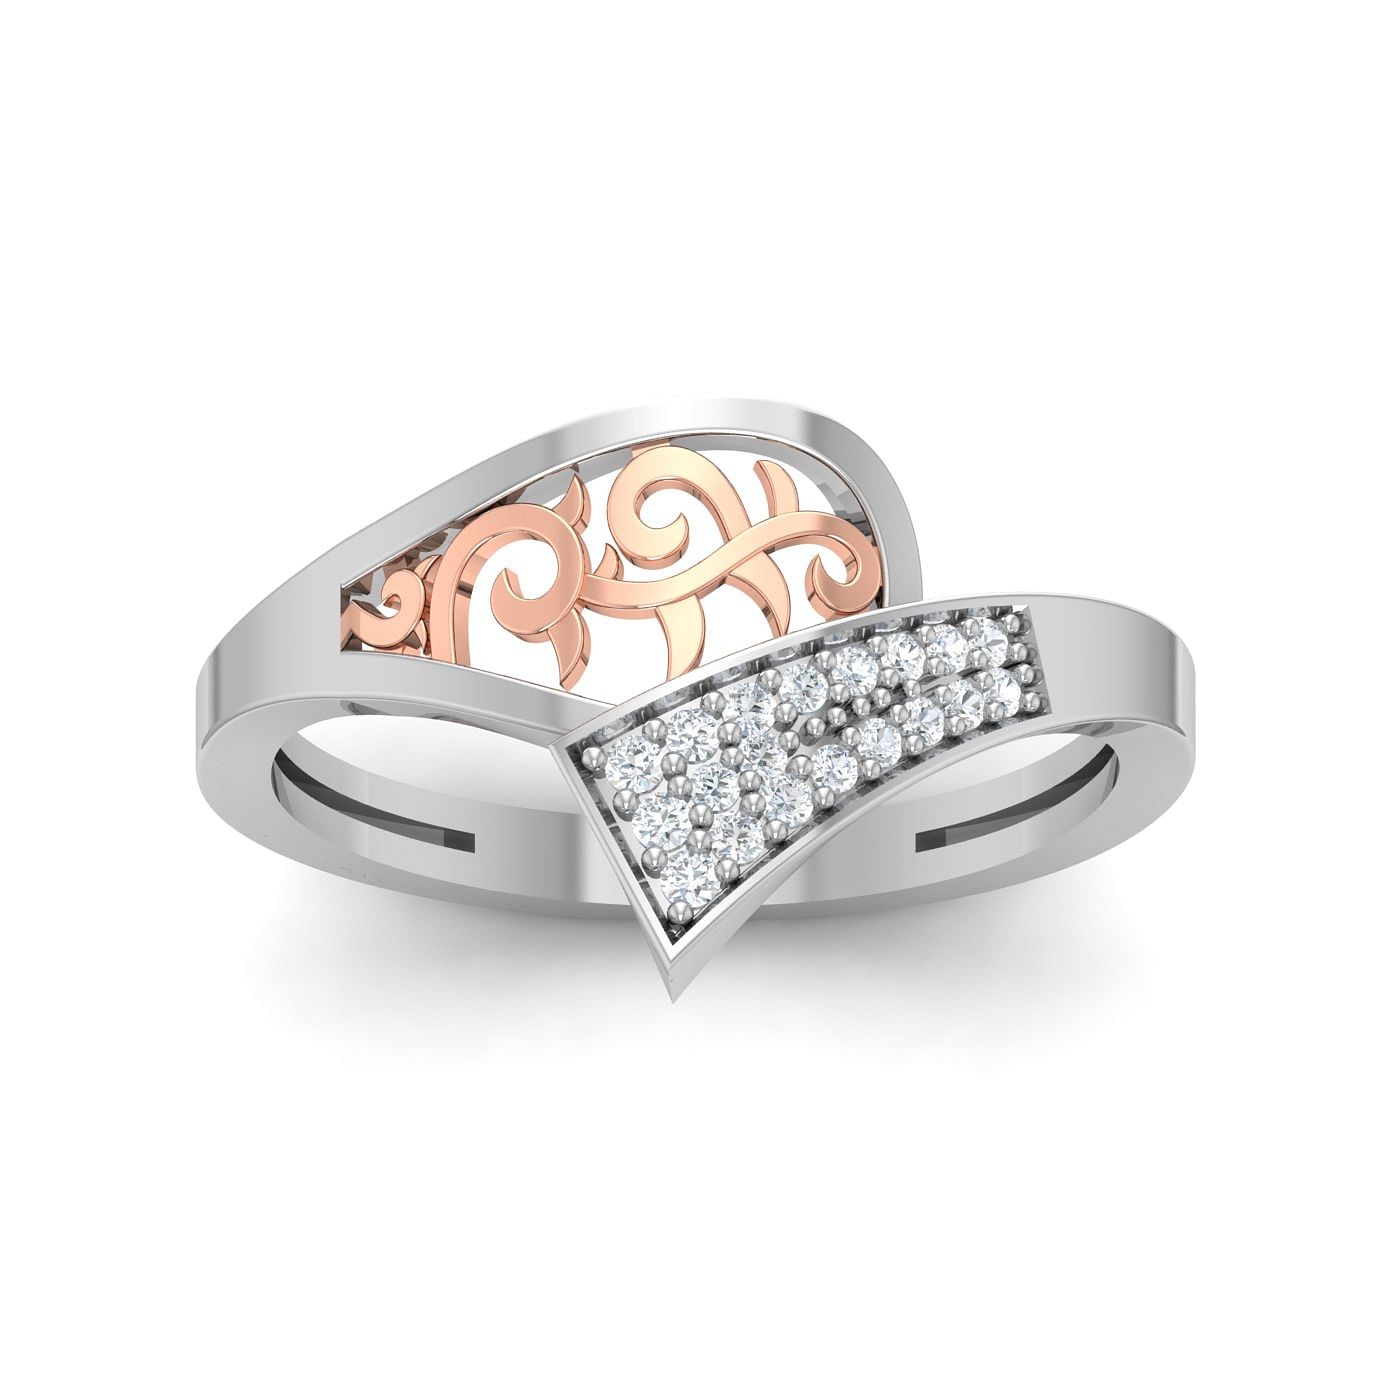 Carving Style White Gold Diamond Ring For Women